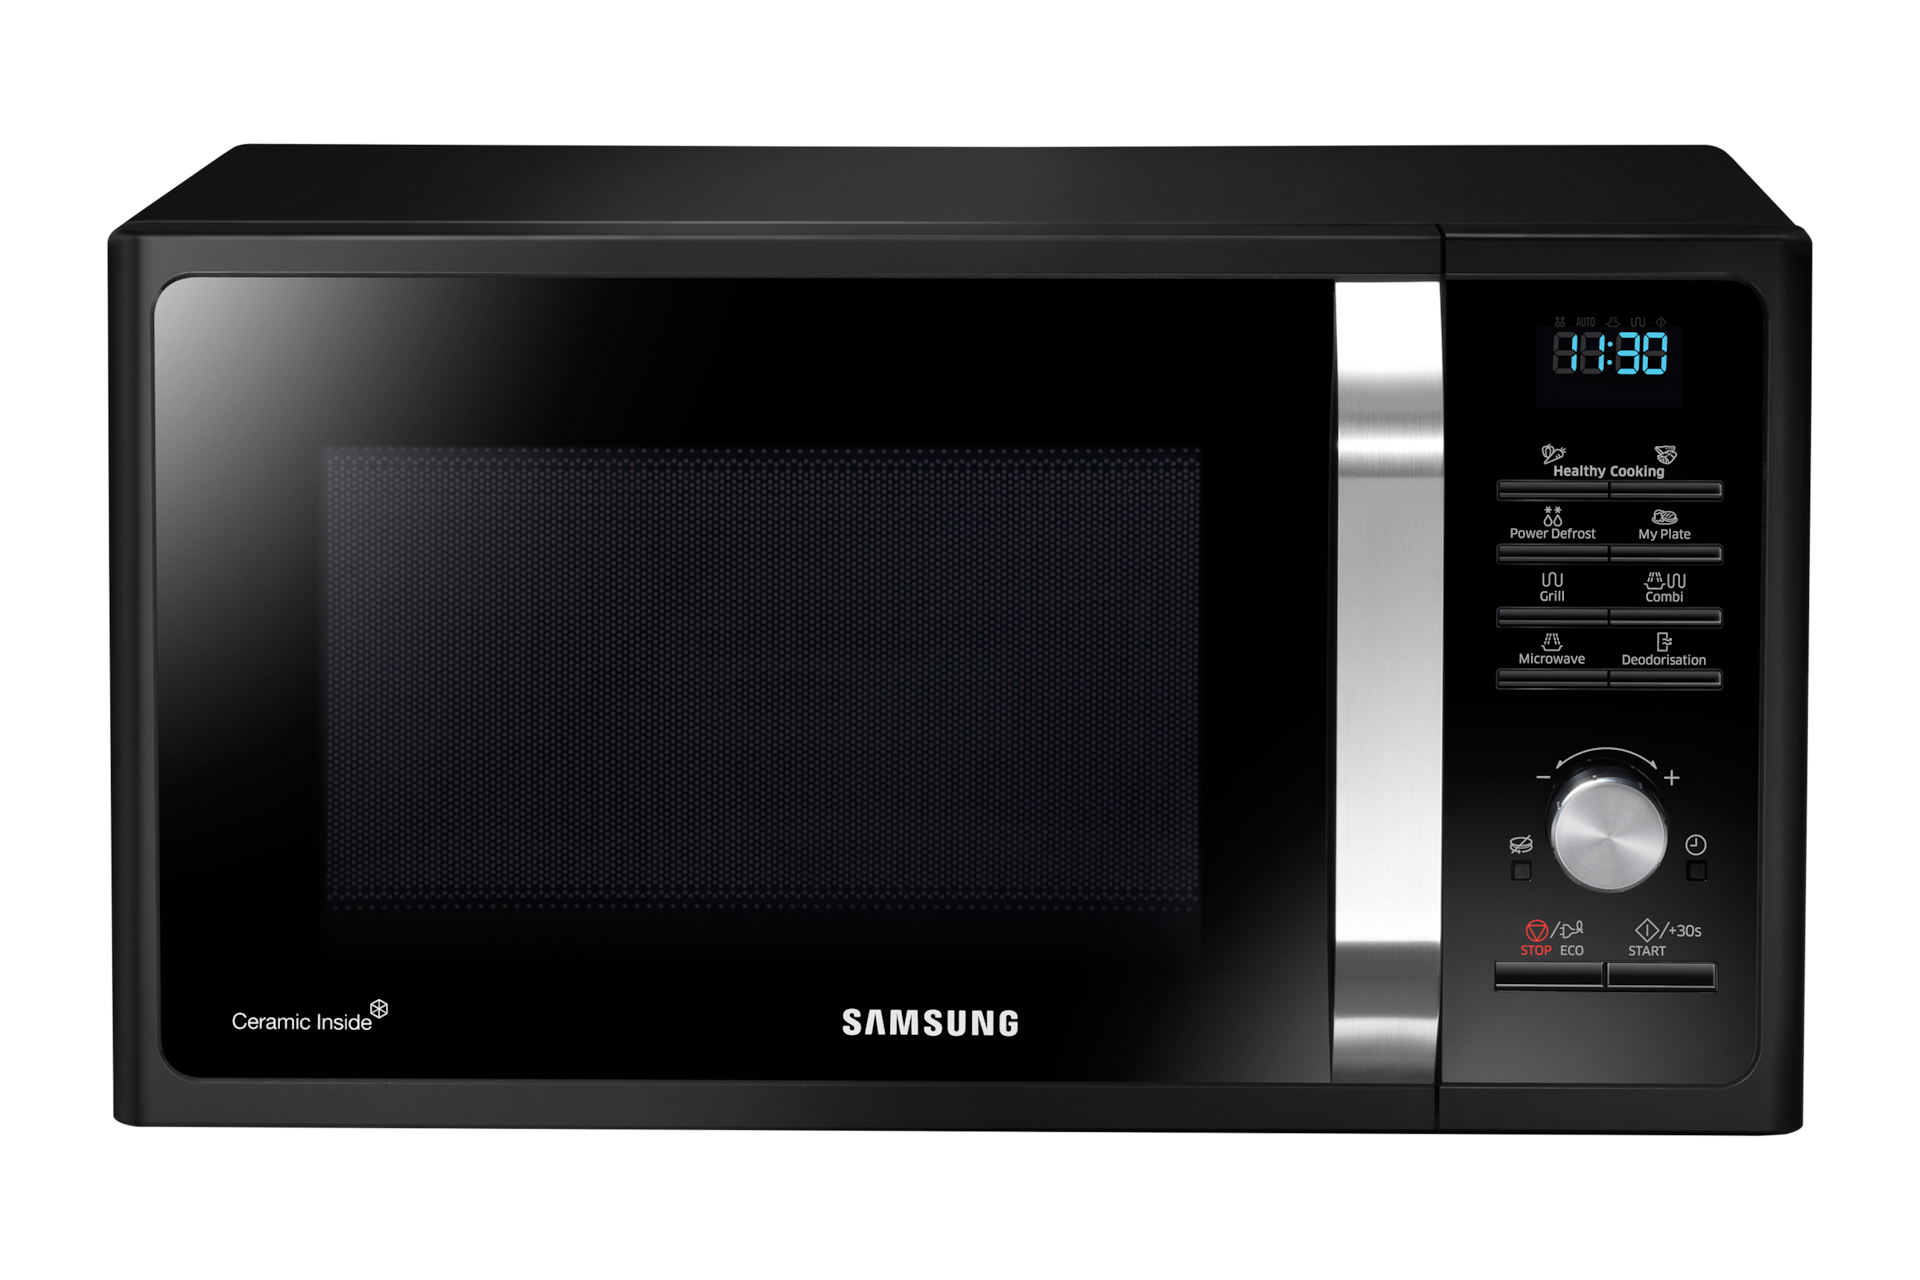 Micro-ondes monofonction SAMSUNG 28L Silver MS28F303TFS